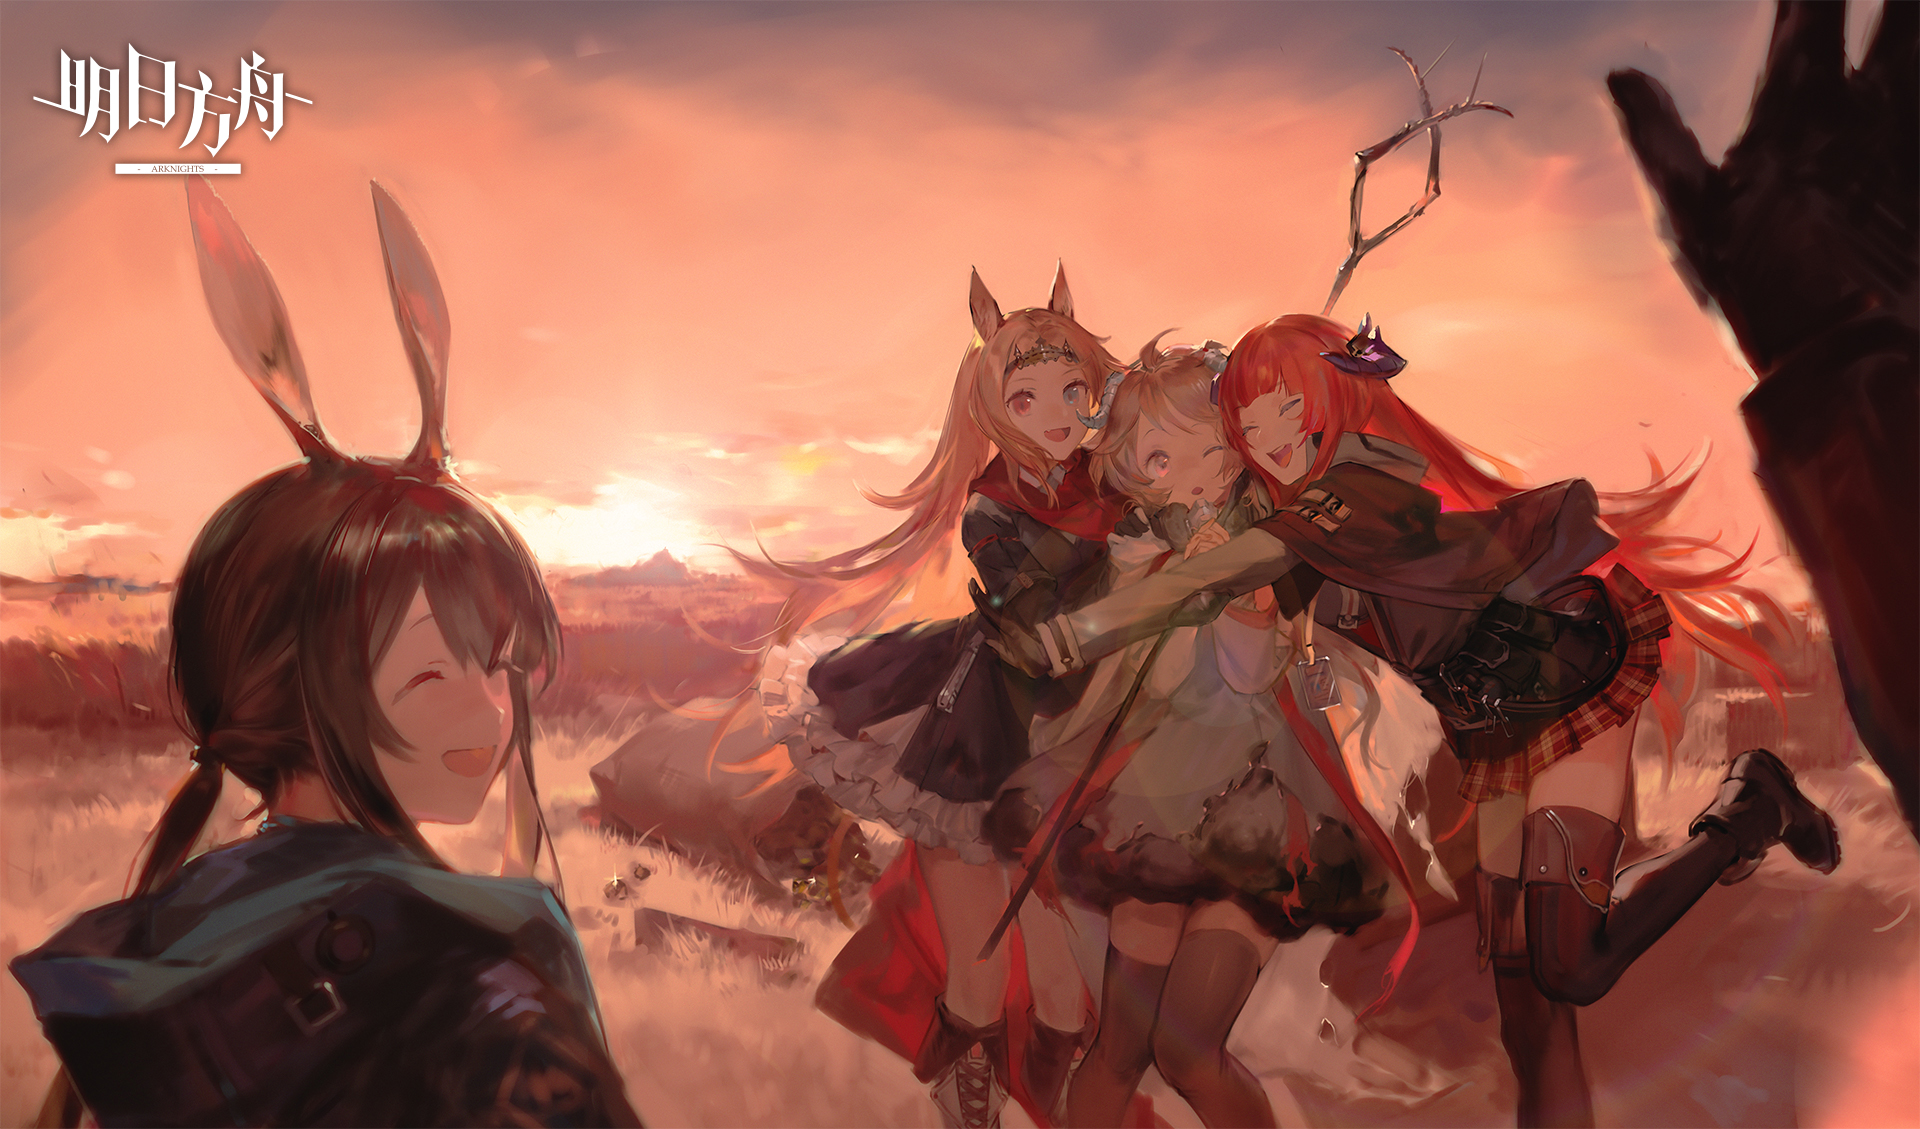 Anime 1920x1129 anime girls Arknights video game characters sunset SanMuYYB Amiya (Arknights) Archetto (Arknights) Bagpipe(Arknights) Eyjafjalla(Arknights) POV